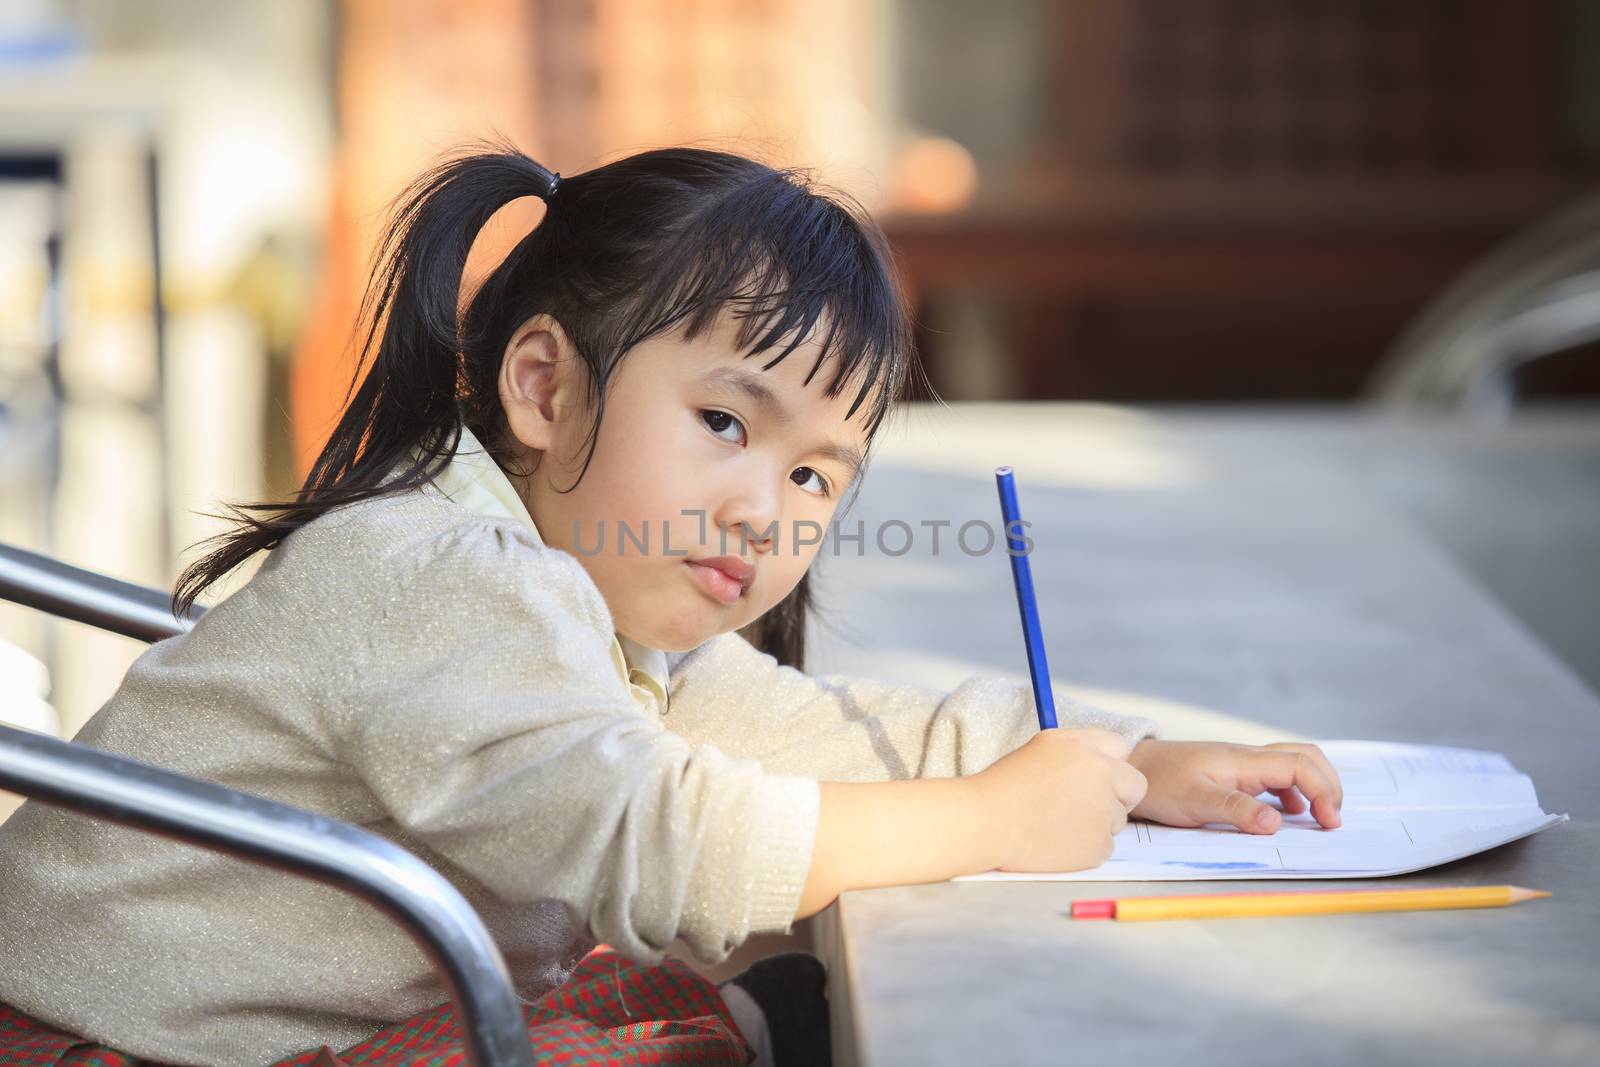 asian children with yellow pencil in hand doing school home work with happiness emotion 